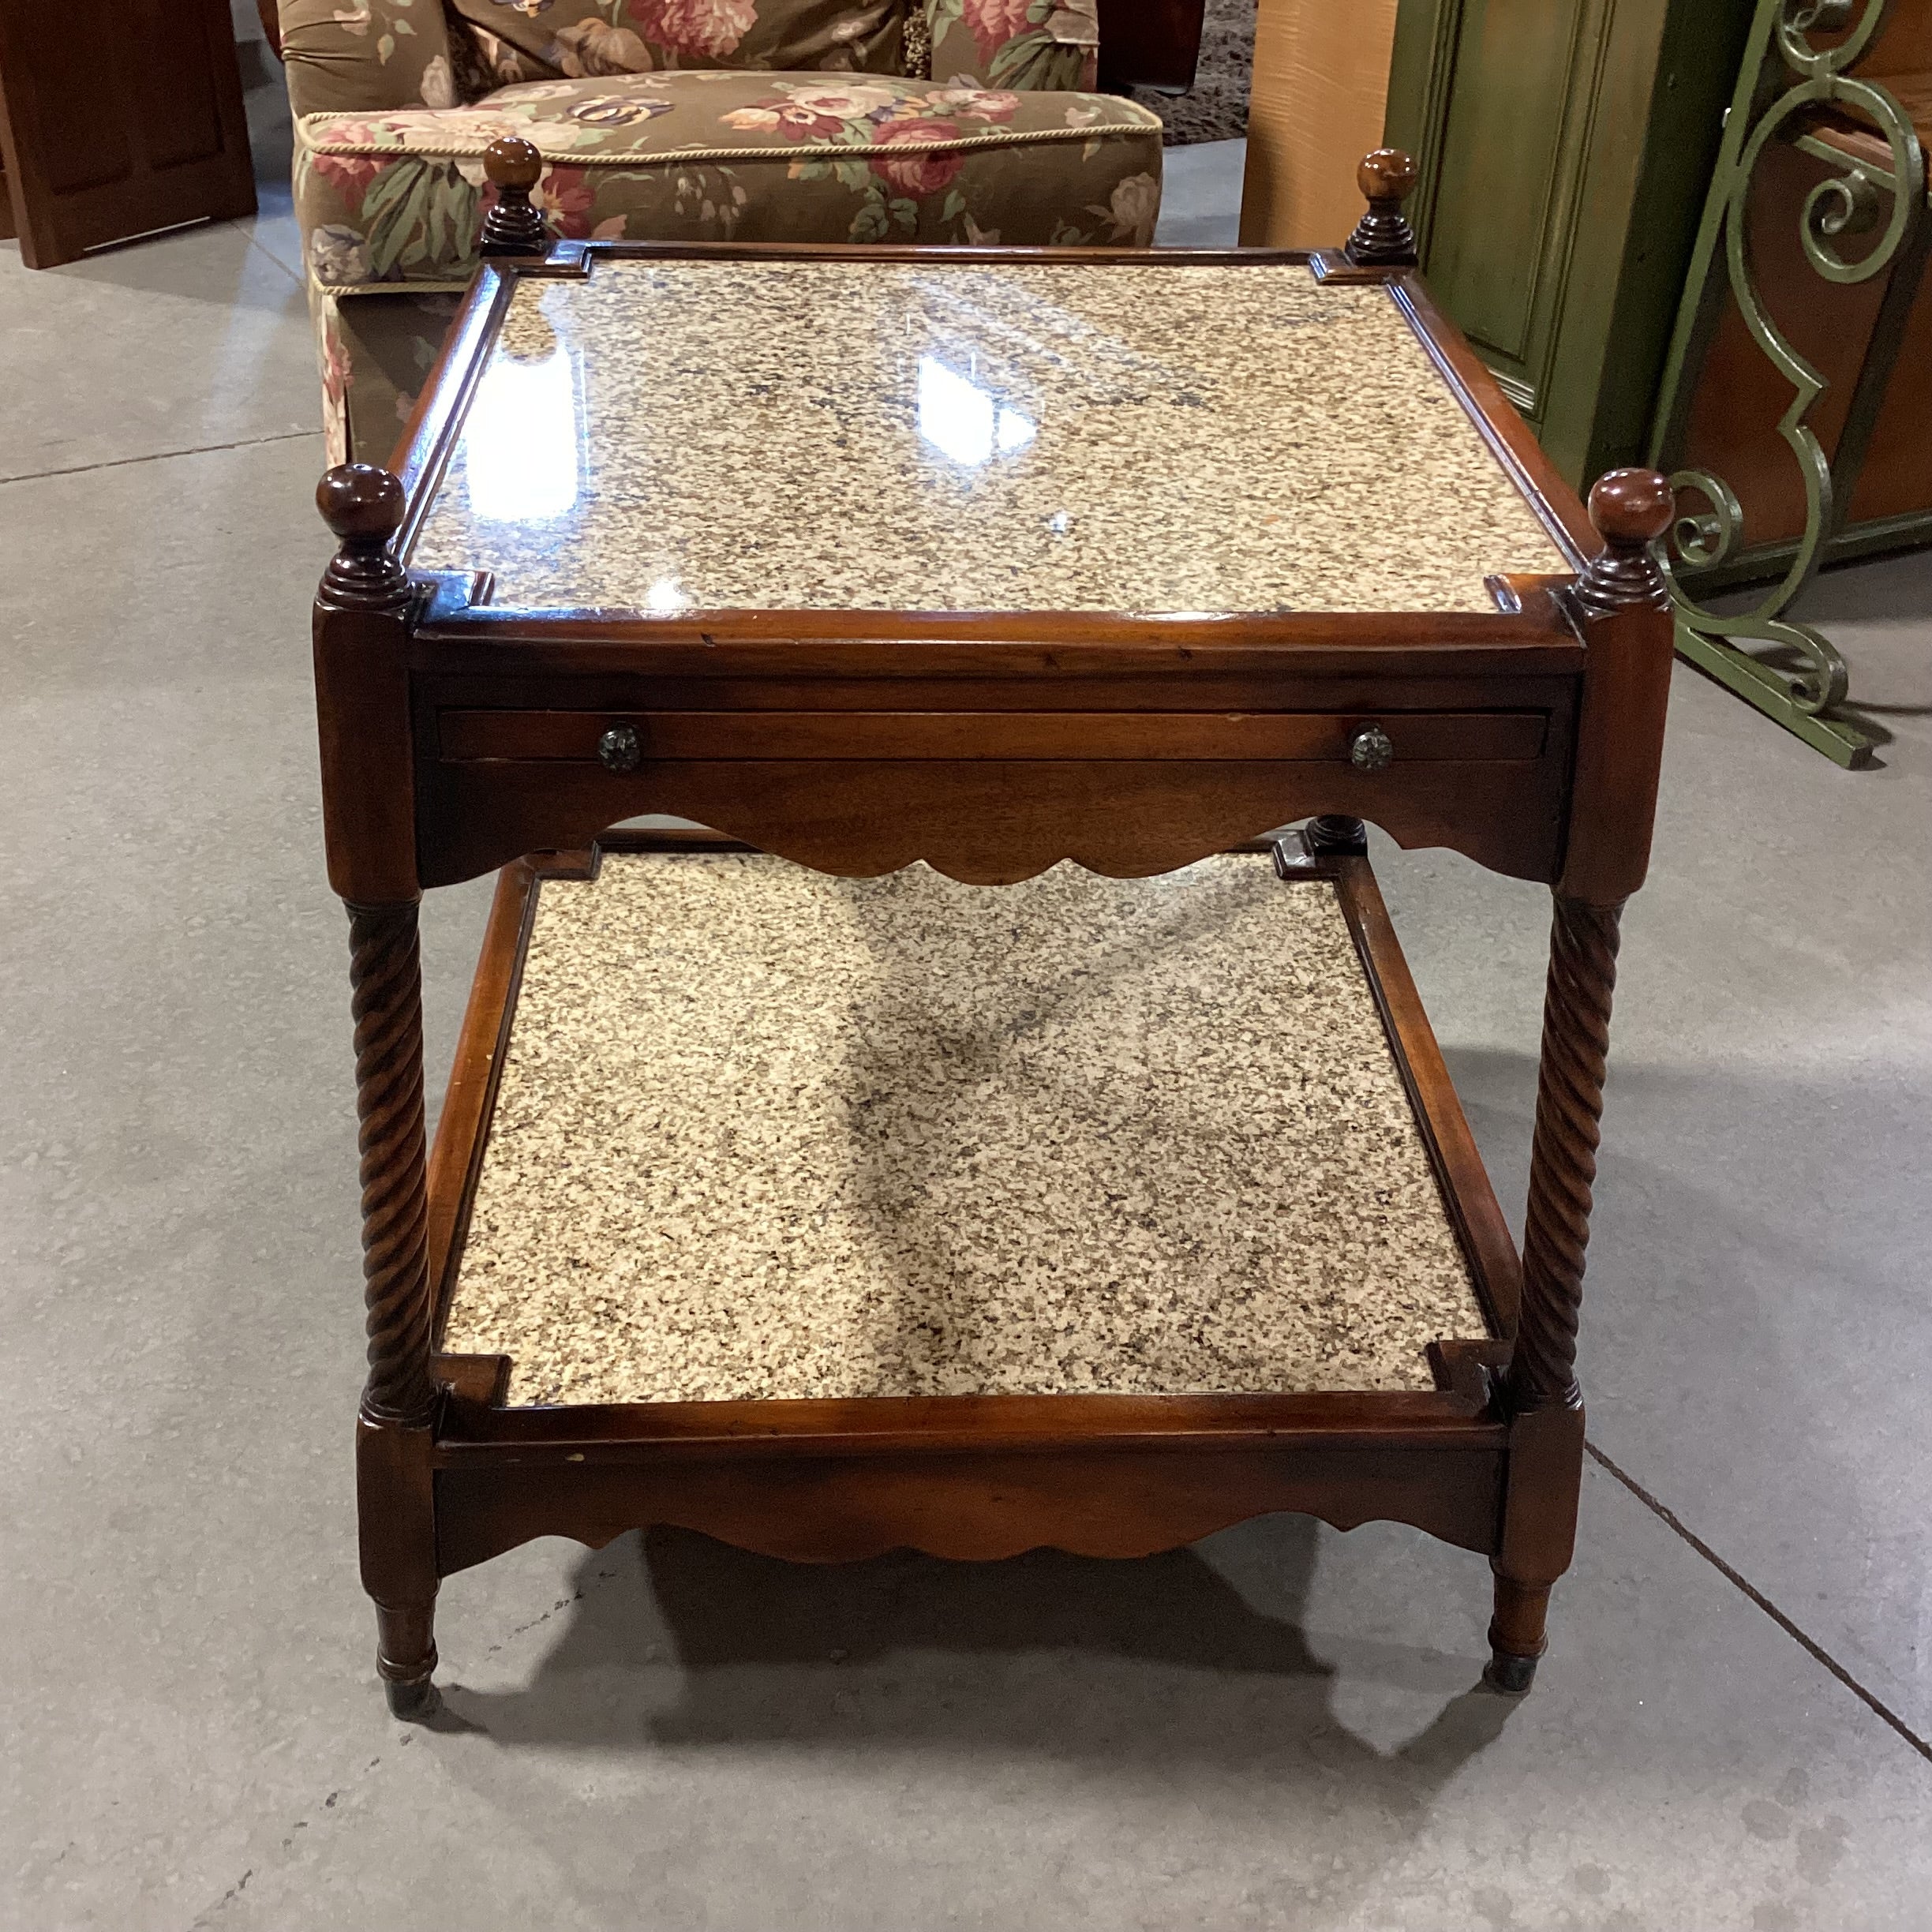 Spindle Carved wood & Granite 2 Tiered Accent Table 24"x 24"x 27"